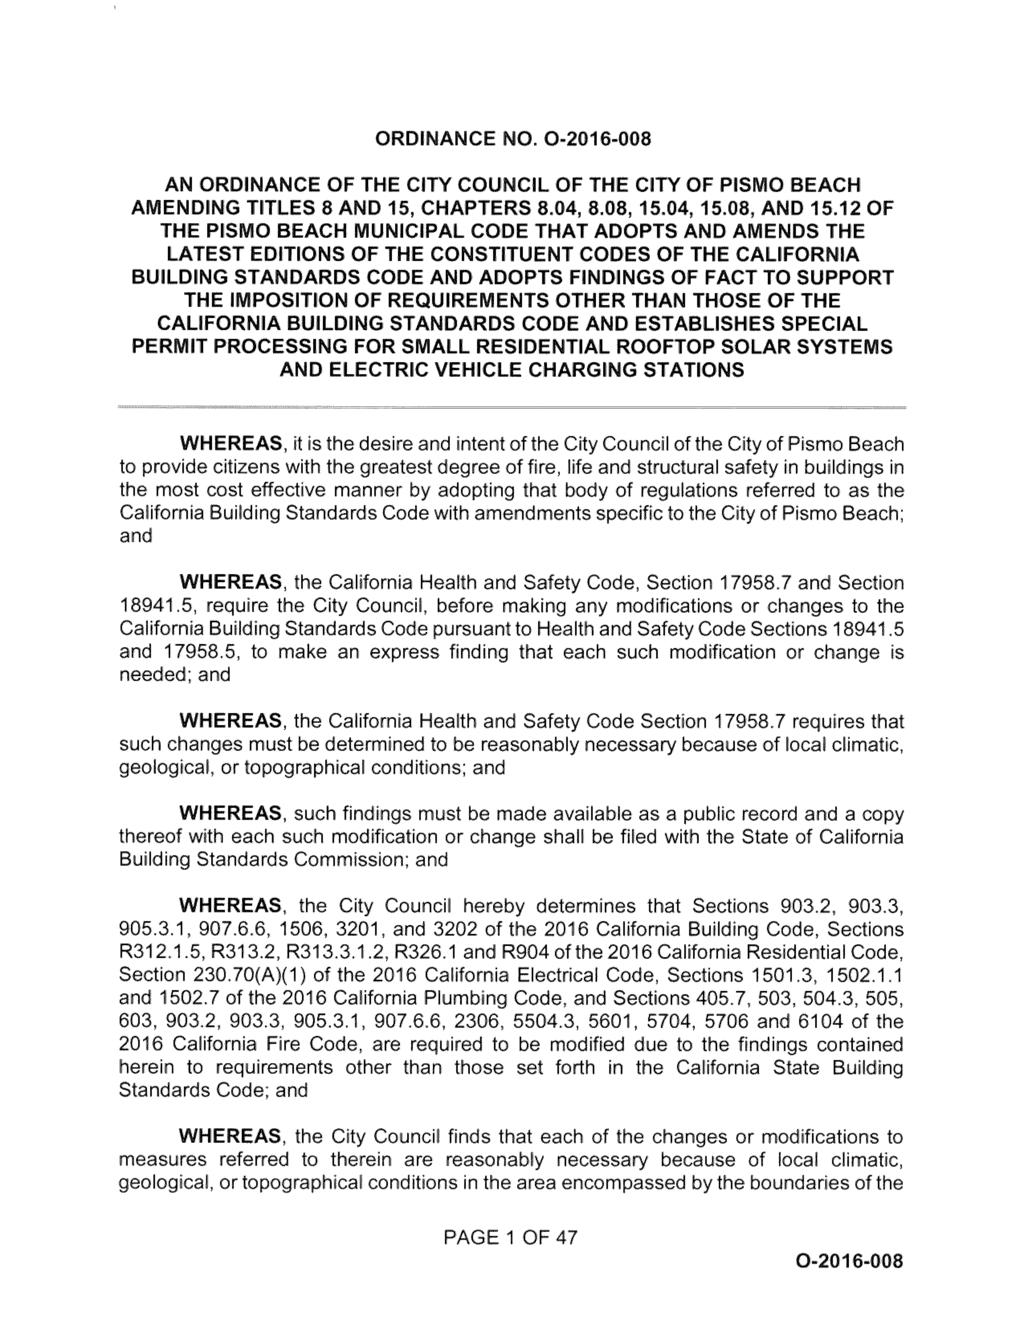 ORDINANCE NO. AN ORDINANCE OF THE CITY COU '' CIL OF THE CITY OF PISMO EACH AMENDING TITLES 8 AND 15, CHAPTERS 8. 04, 8. 08, 15. 04, 15. 08, AND 15.